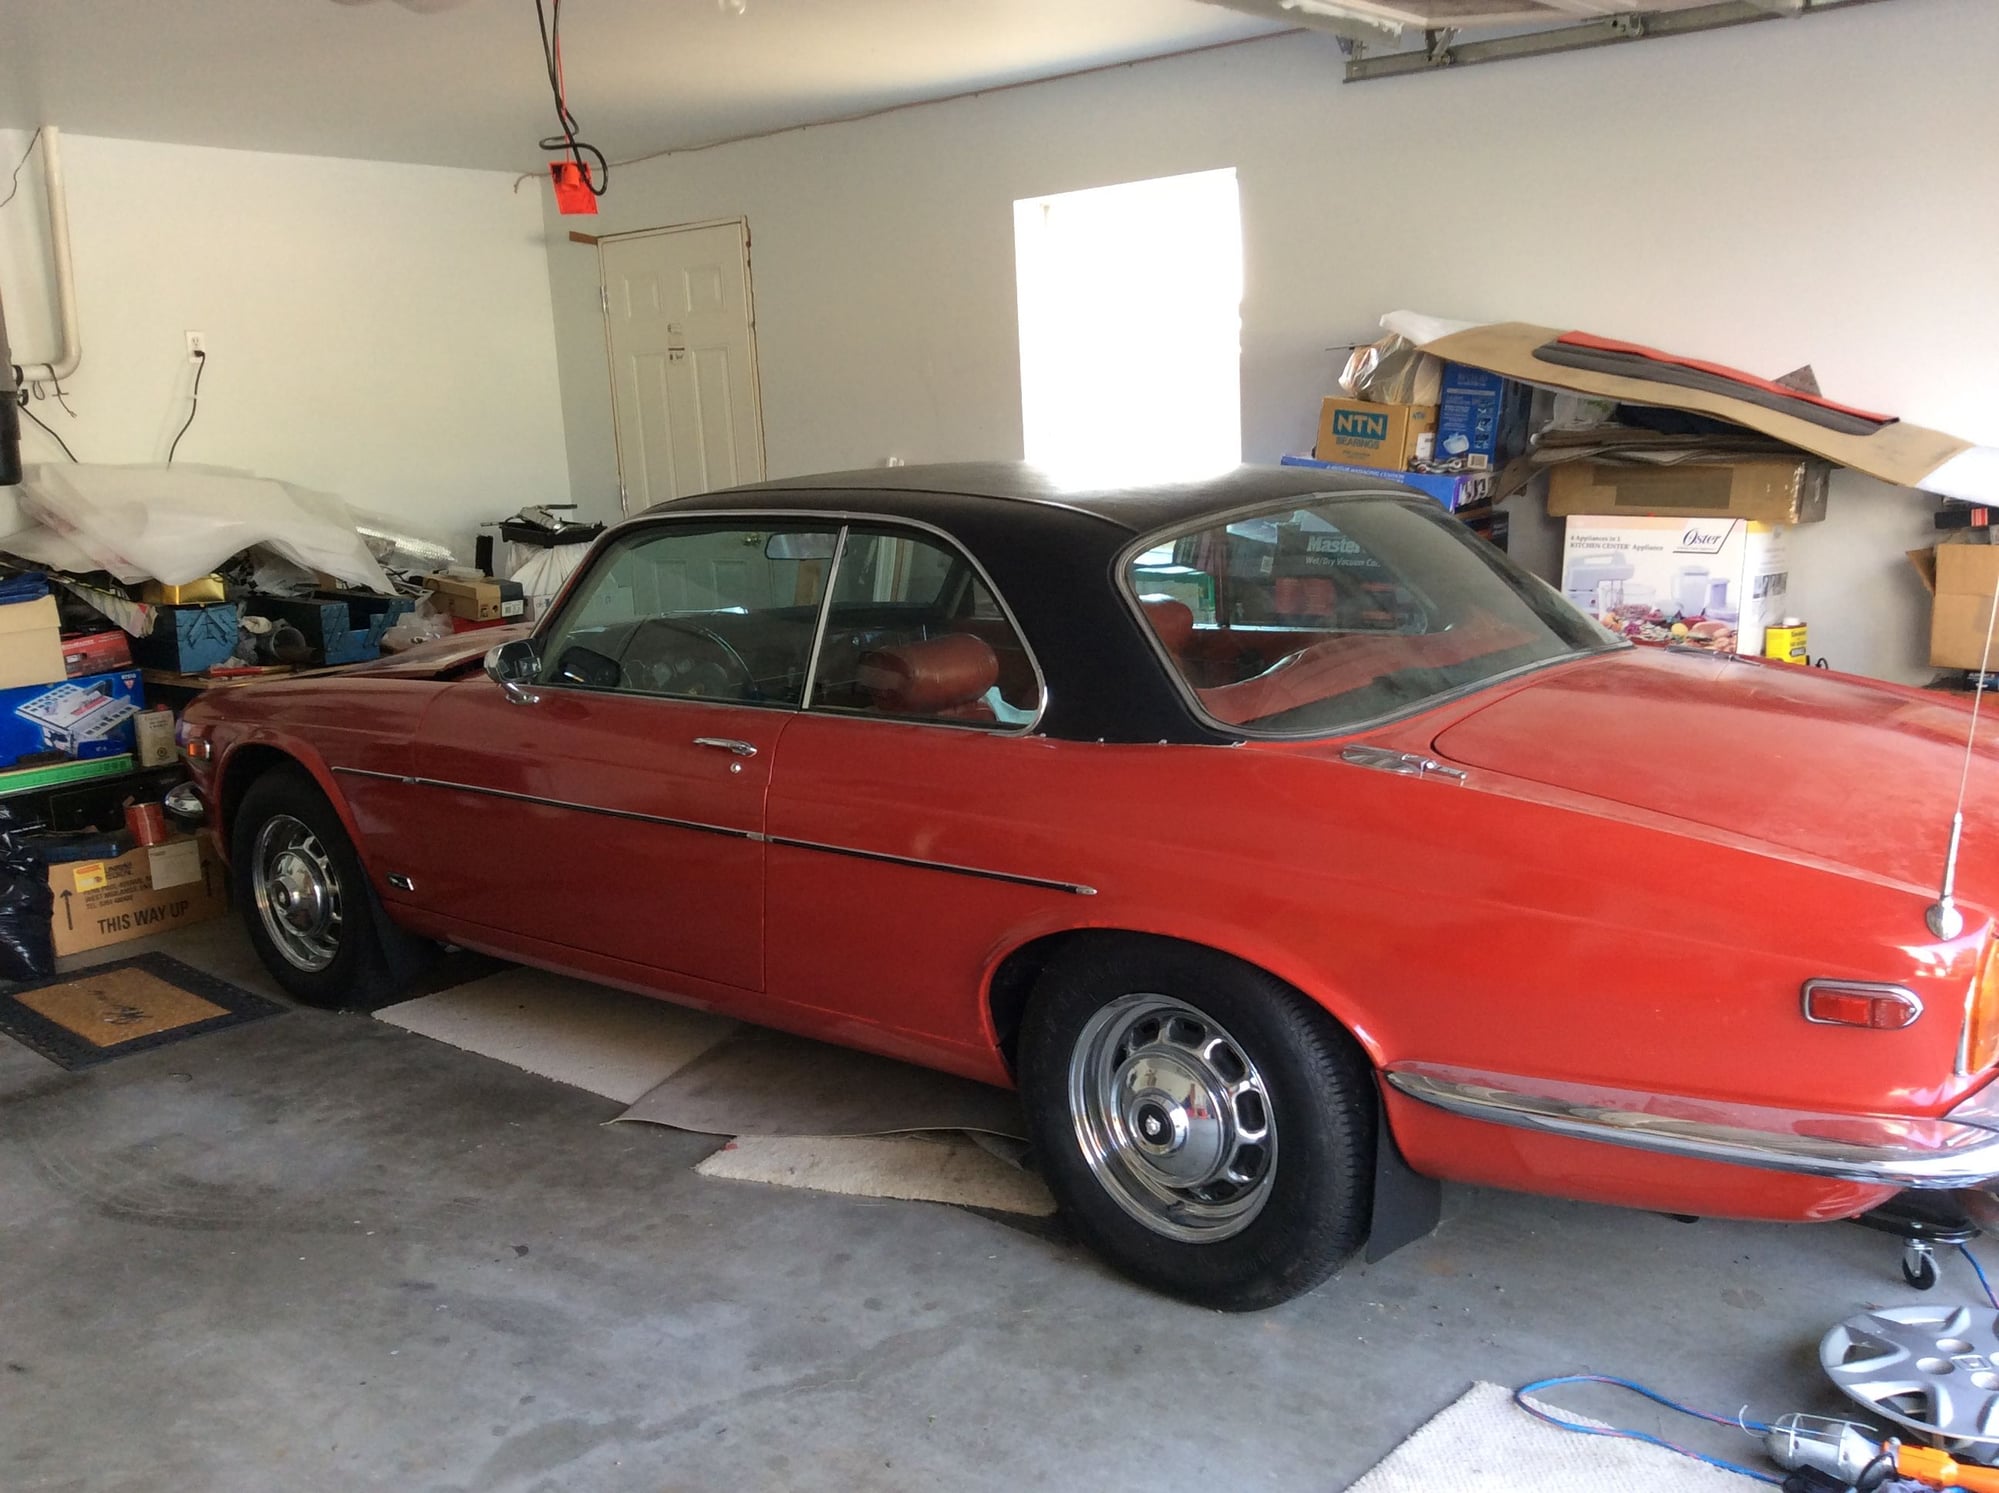 1977 Jaguar XJ6 - XJ6C For Sale - Used - VIN UF2J5019700000000 - 86,600 Miles - 6 cyl - 2WD - Automatic - Coupe - Red - Abbotsford B.c, BC V2S7J1, Canada